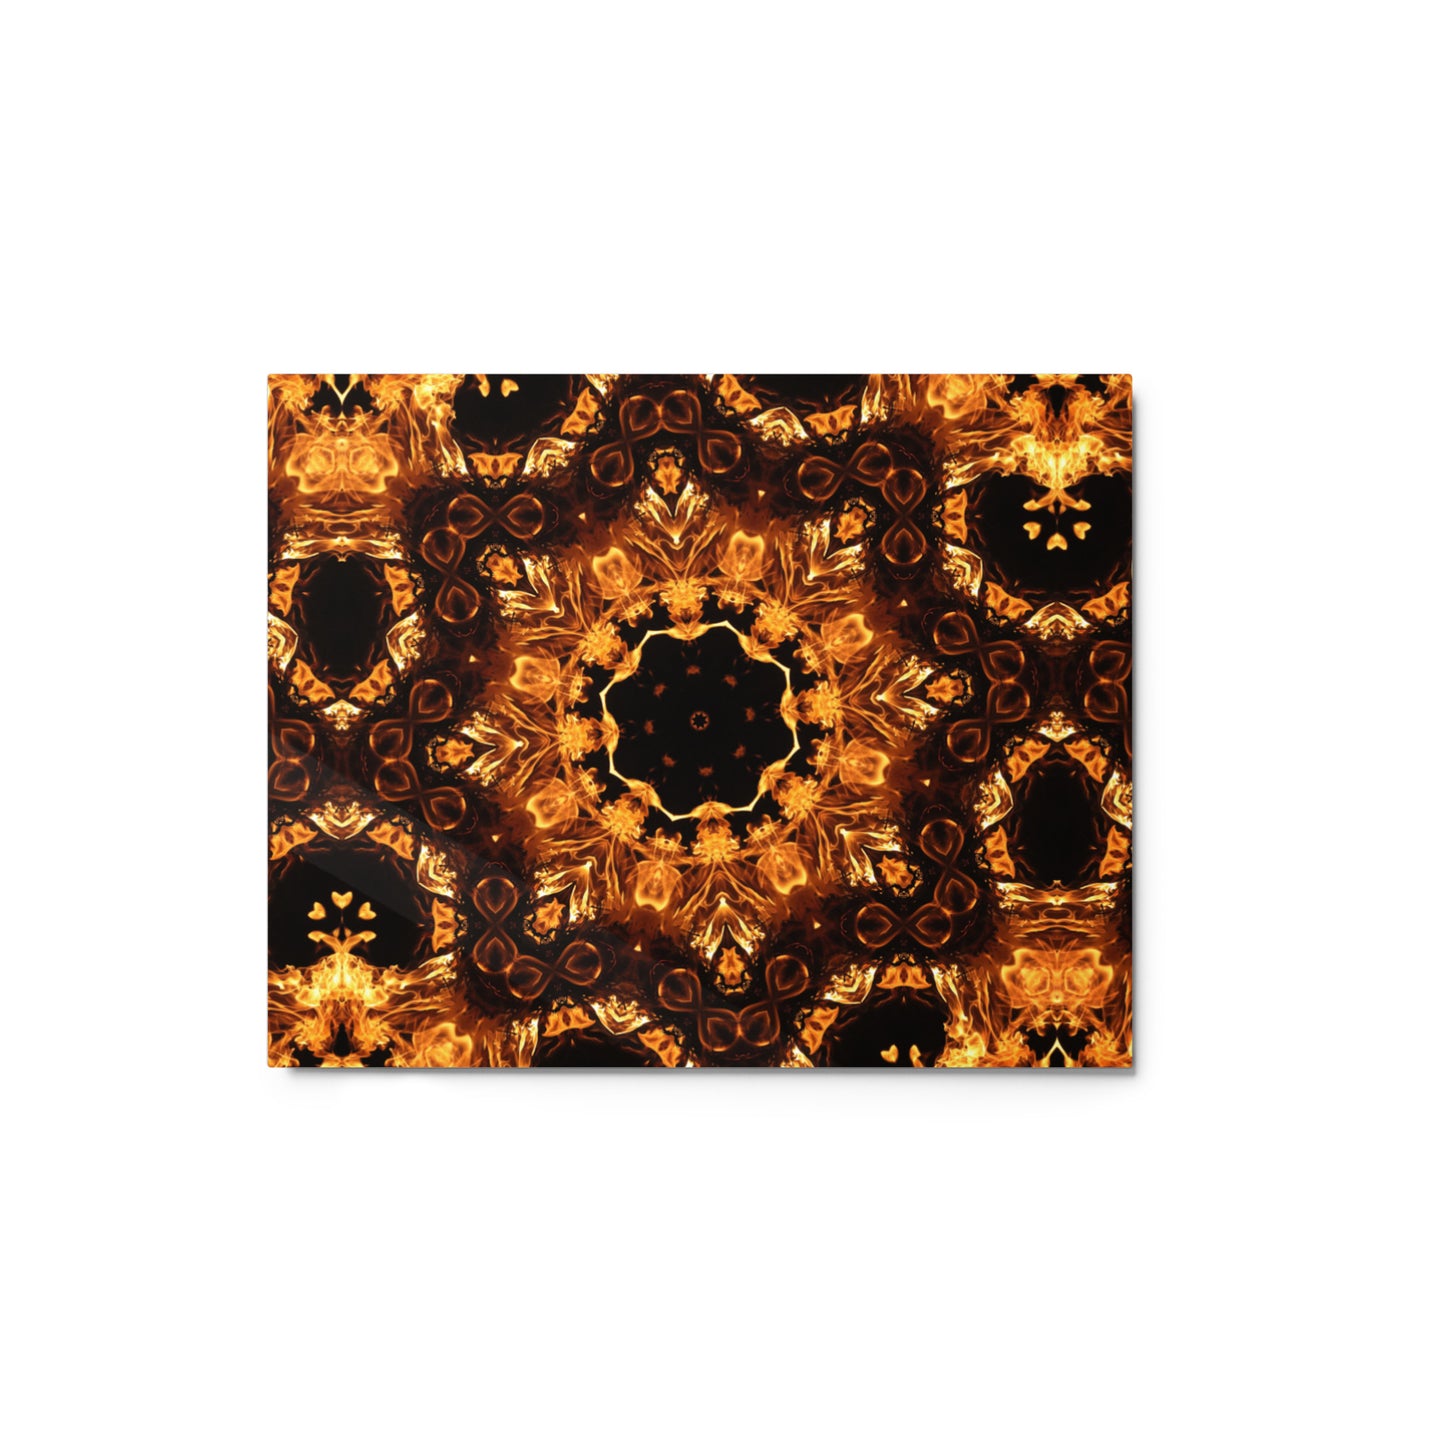 Fire Spirits Metal Print - "Snow Flake" (Mandala Ed.) (available only in the USA)